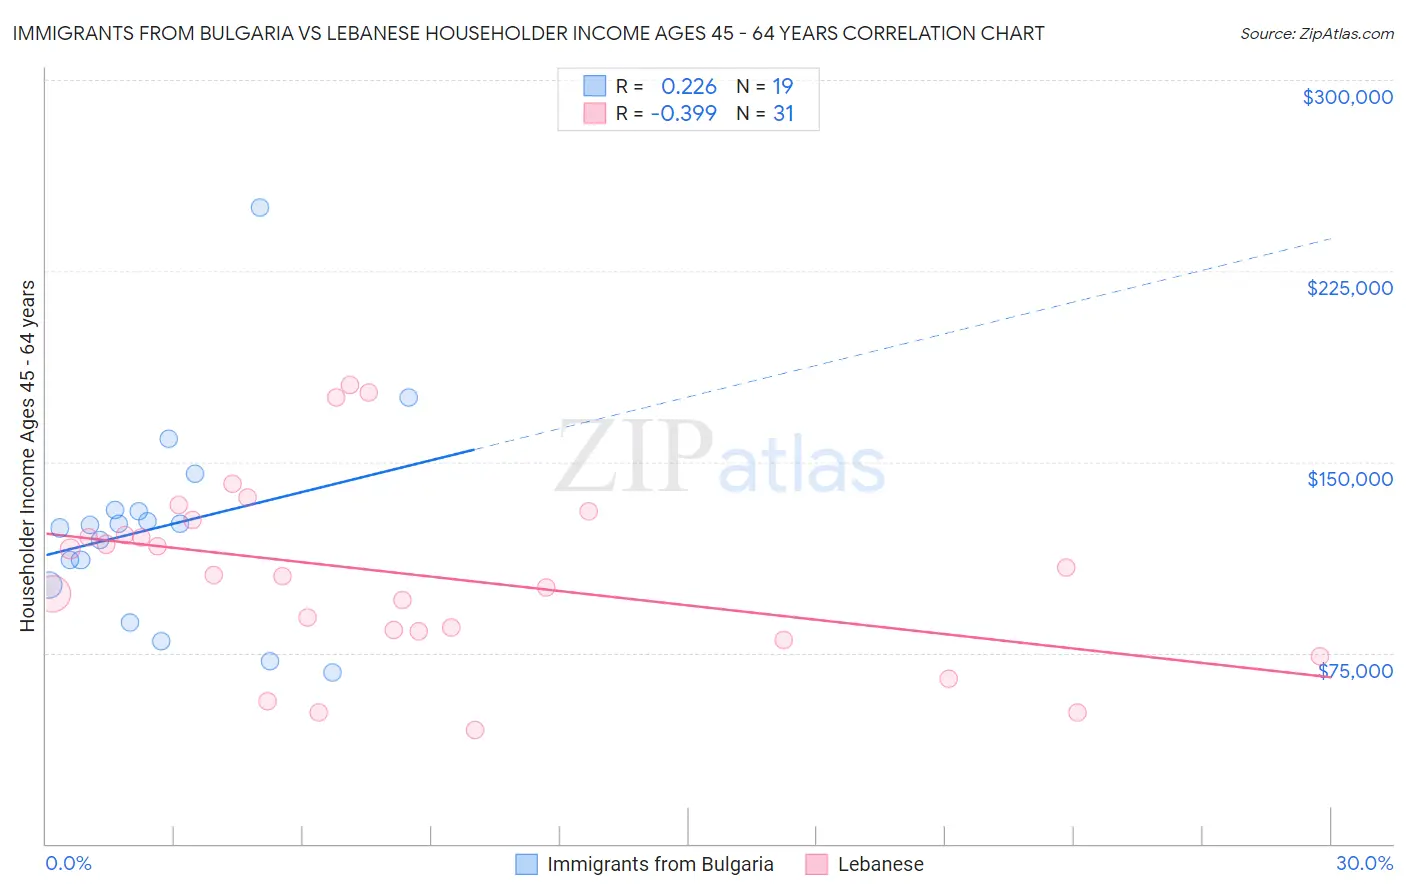 Immigrants from Bulgaria vs Lebanese Householder Income Ages 45 - 64 years